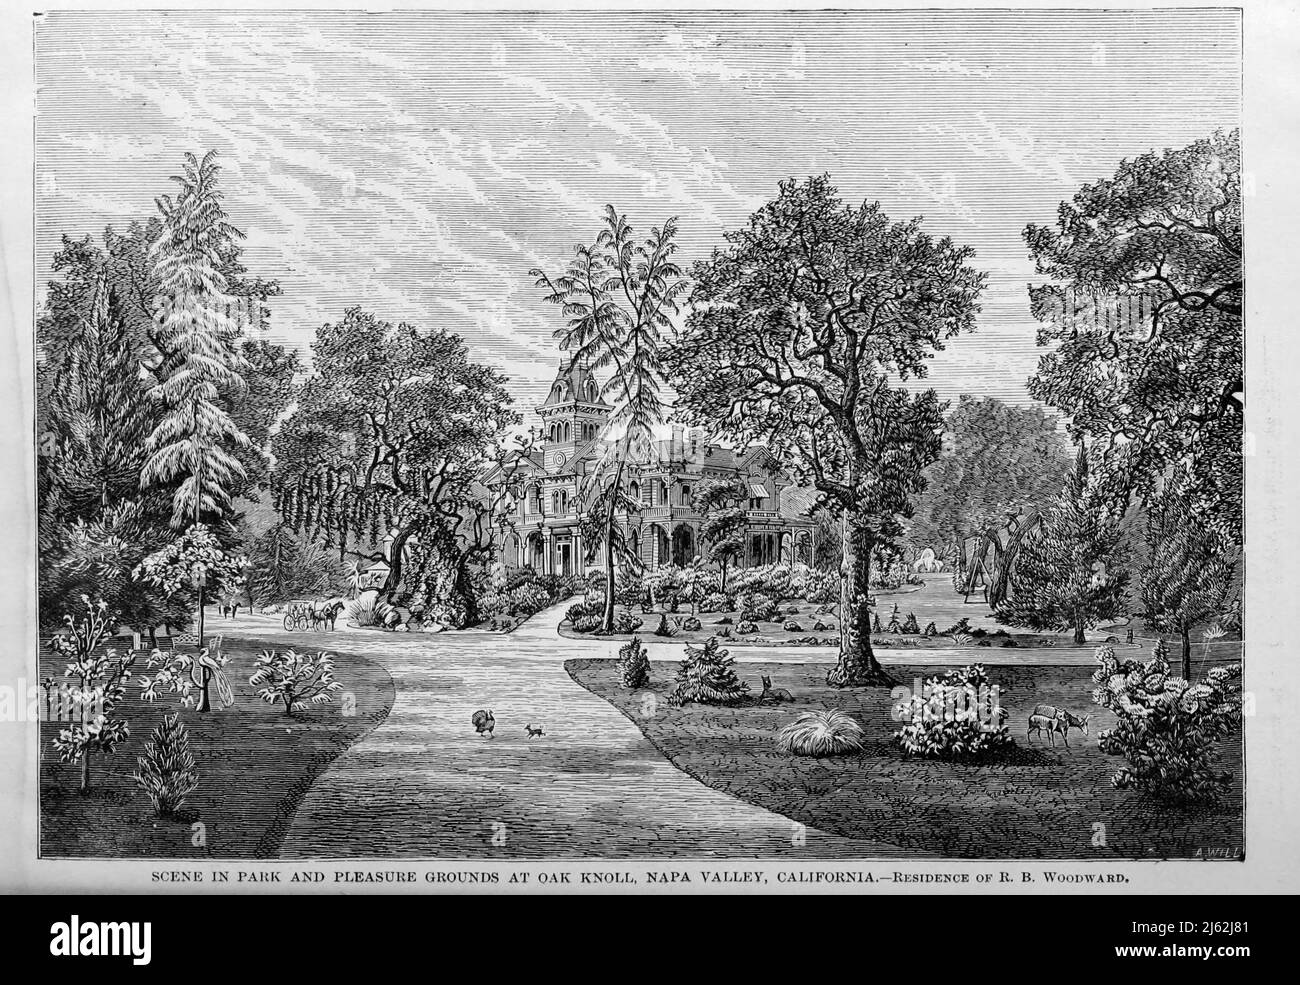 Scene in Park and Pleasure Grounds at Oak Knoll, Napa Valley, California - Residence of R. B. Woodward from the book The Pacific tourist : Adams & Bishop's illustrated trans-continental guide of travel, from the Atlantic to the Pacific Ocean : containing full descriptions of railroad routes across the continent, all pleasure resorts and places of most noted scenery in the Far West, also of all cities, towns, villages, U.S. forts, springs, lakes, mountains, routes of summer travel, best localities for hunting, fishing, sporting, and enjoyment, with all needful information for the pleasure trave Stock Photo